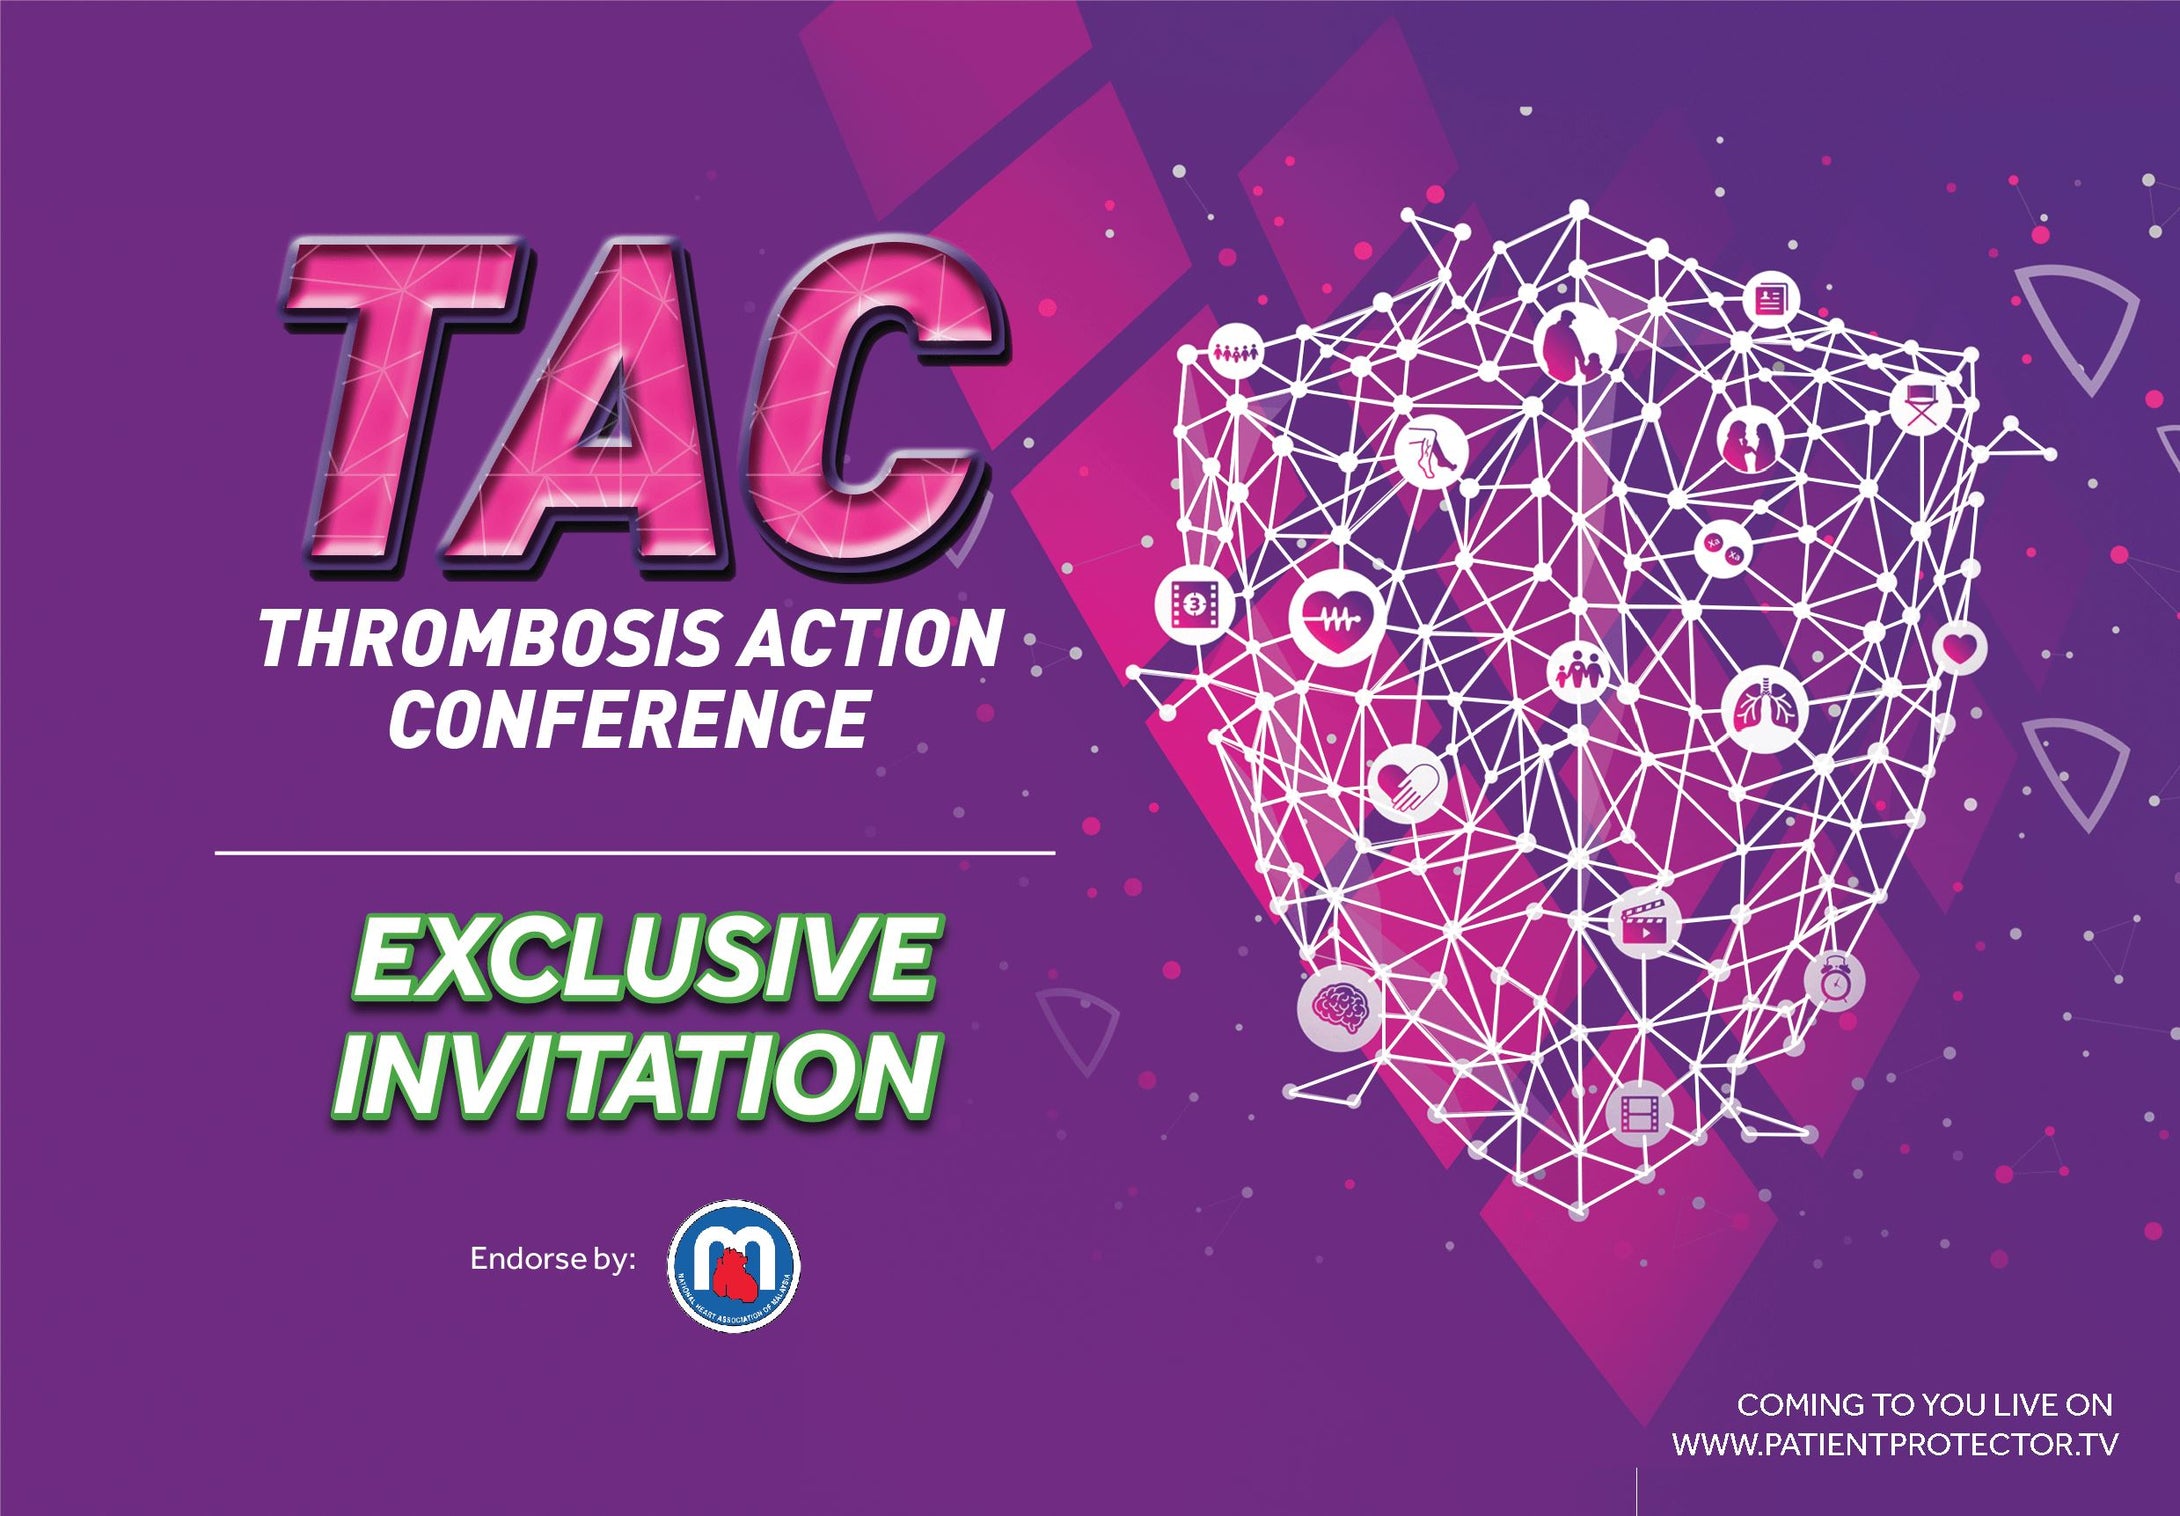 Thrombosis Action Conference (TAC) 2021 (VIDEOS) | Medical Video Courses.